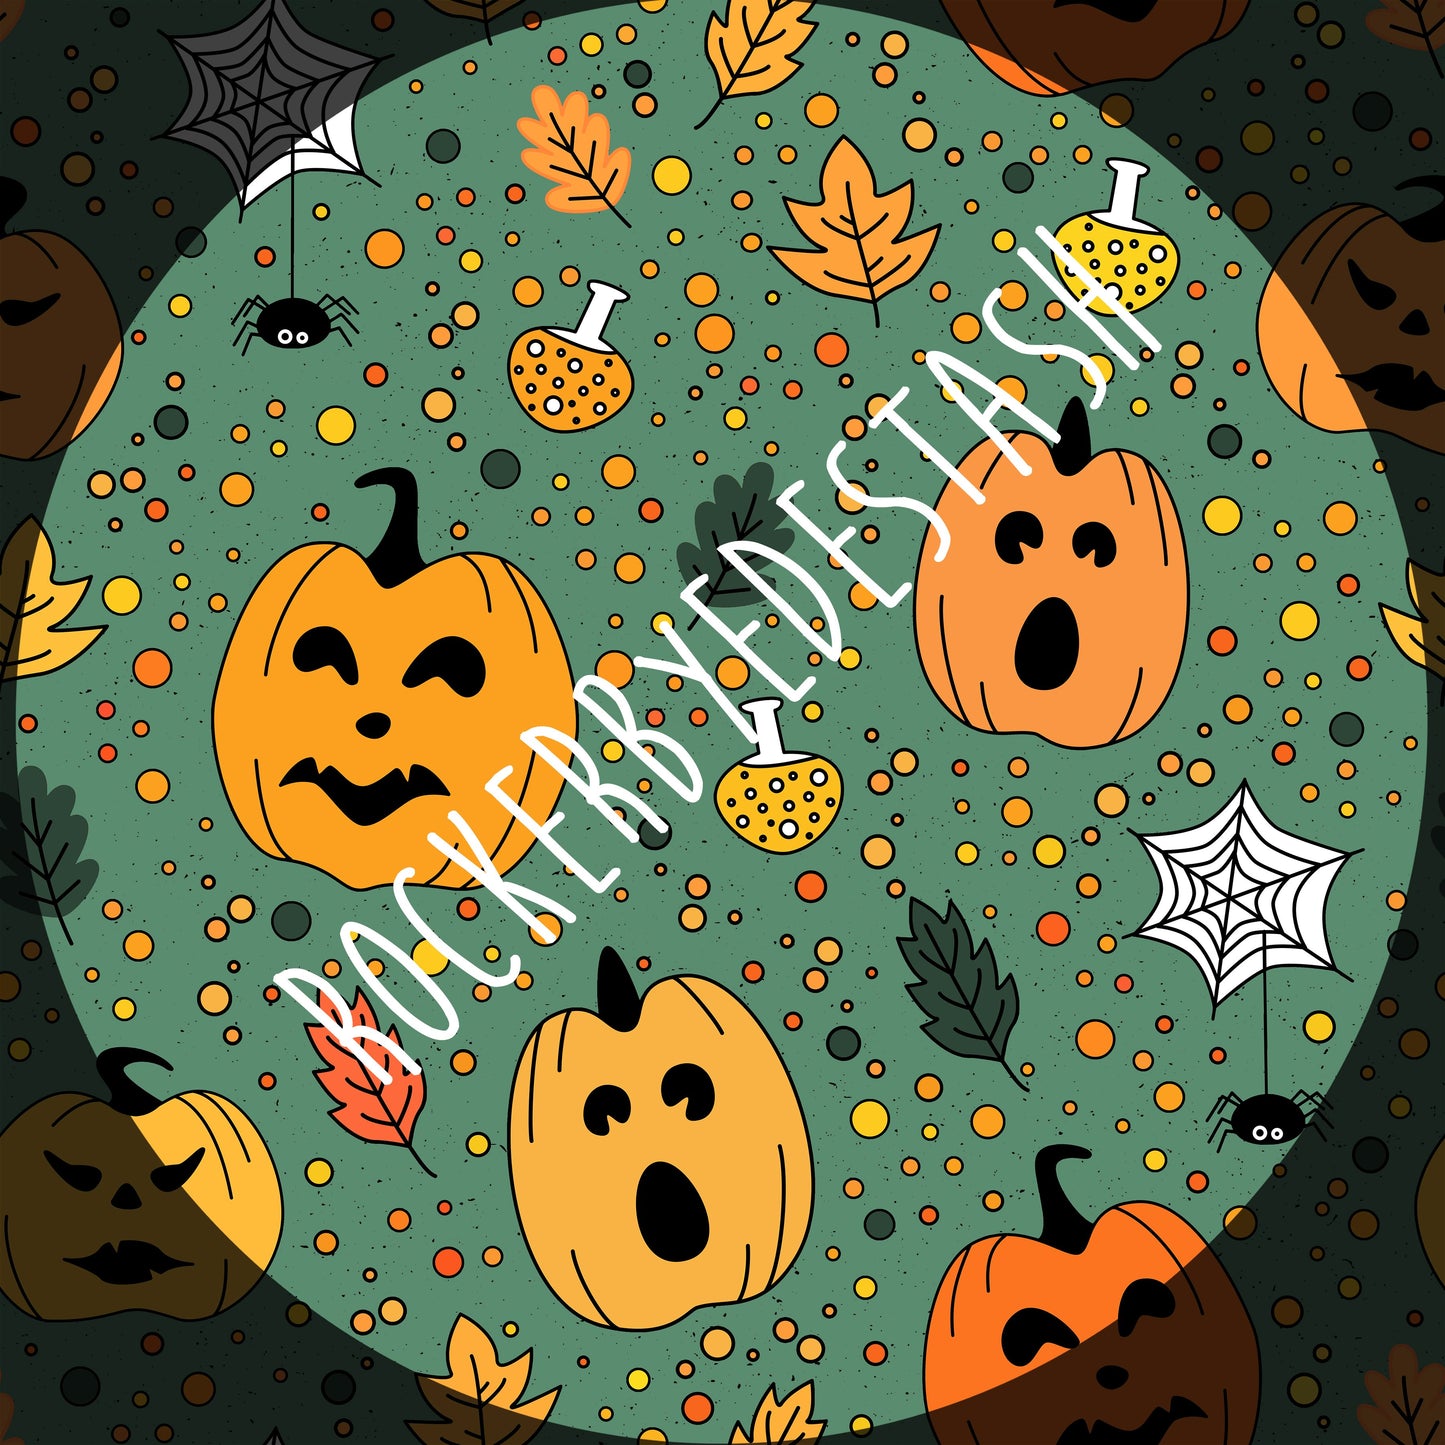 Cotton Lycra - Round JJ Retail - Halloween Prints - Zombies, Bats, and more